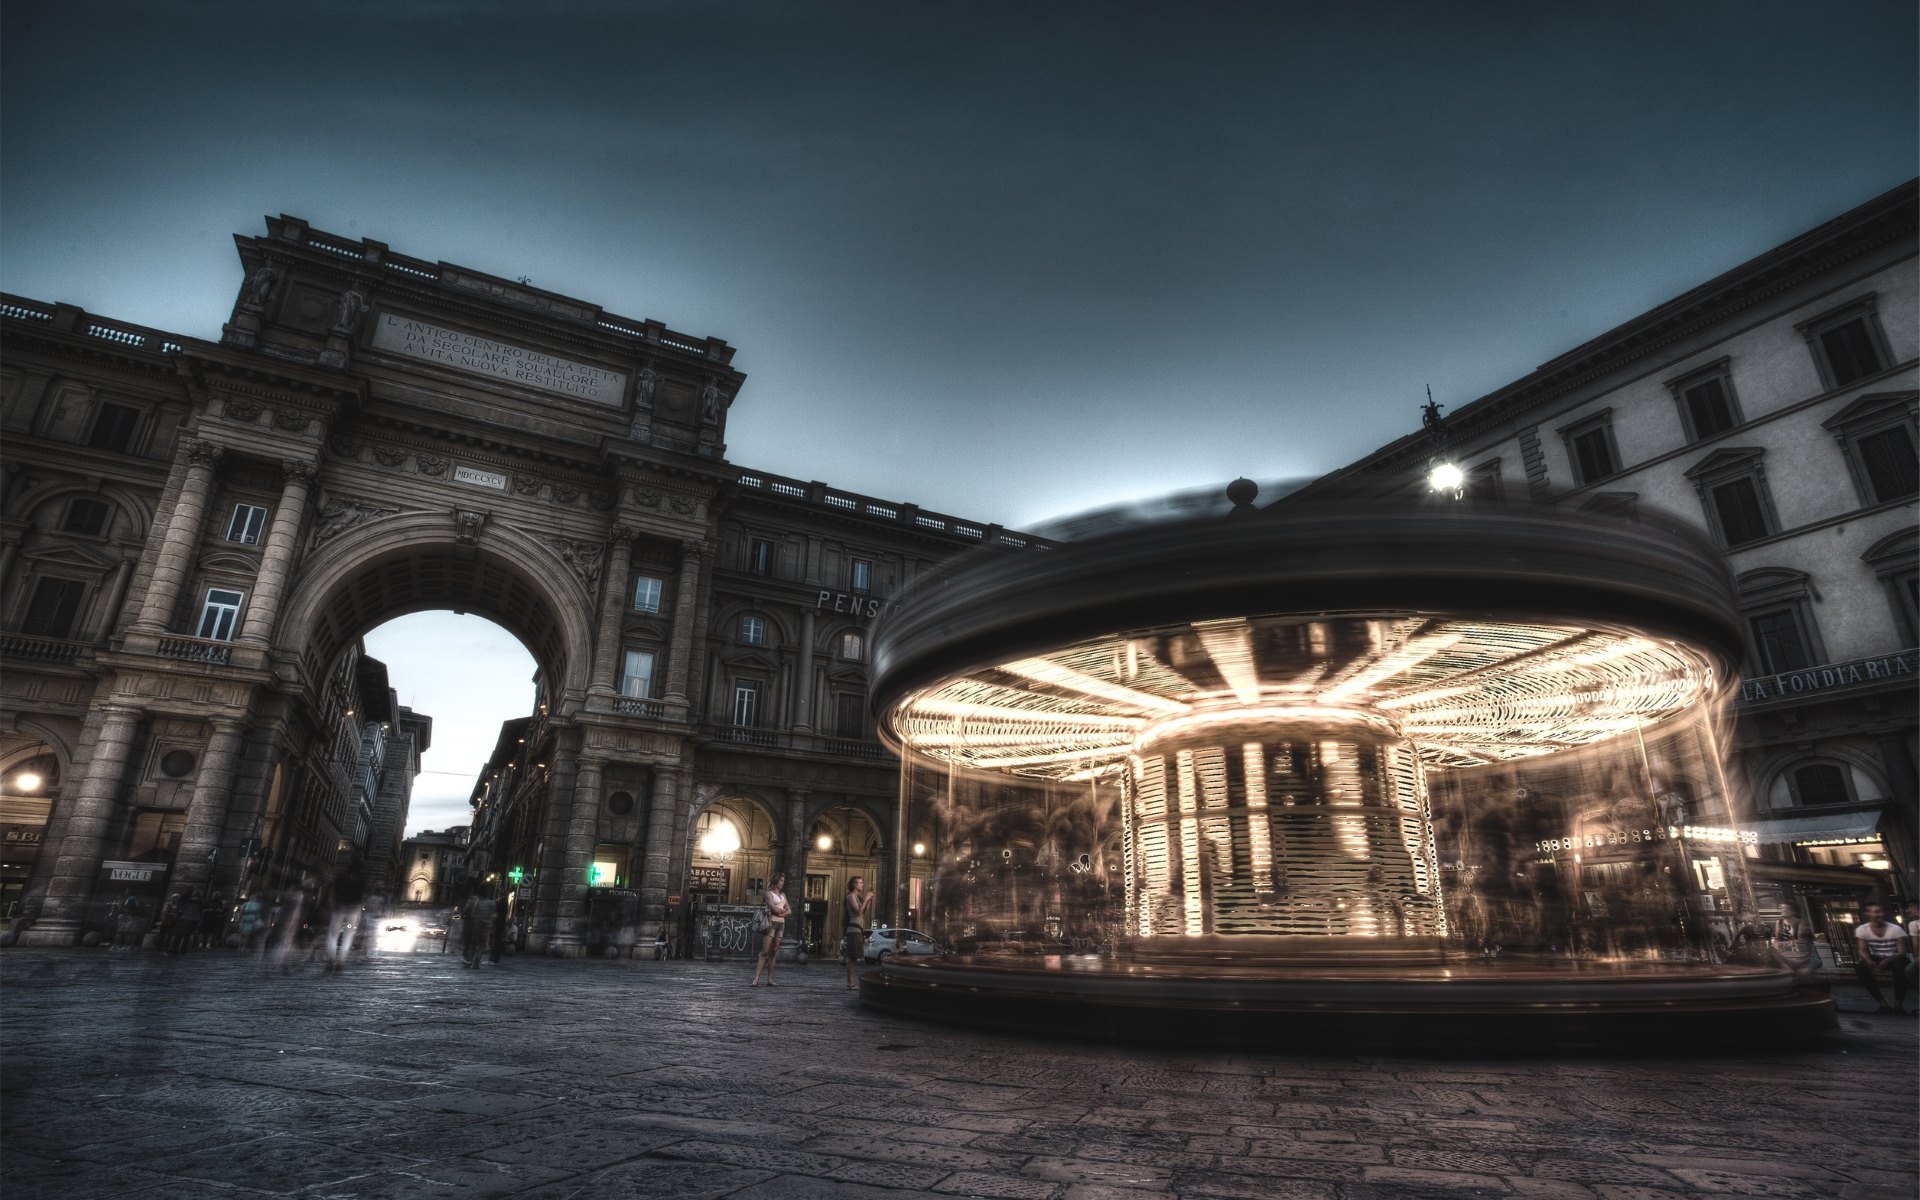 carousel, man made, florence, architecture, building, hdr, night, cities High Definition image